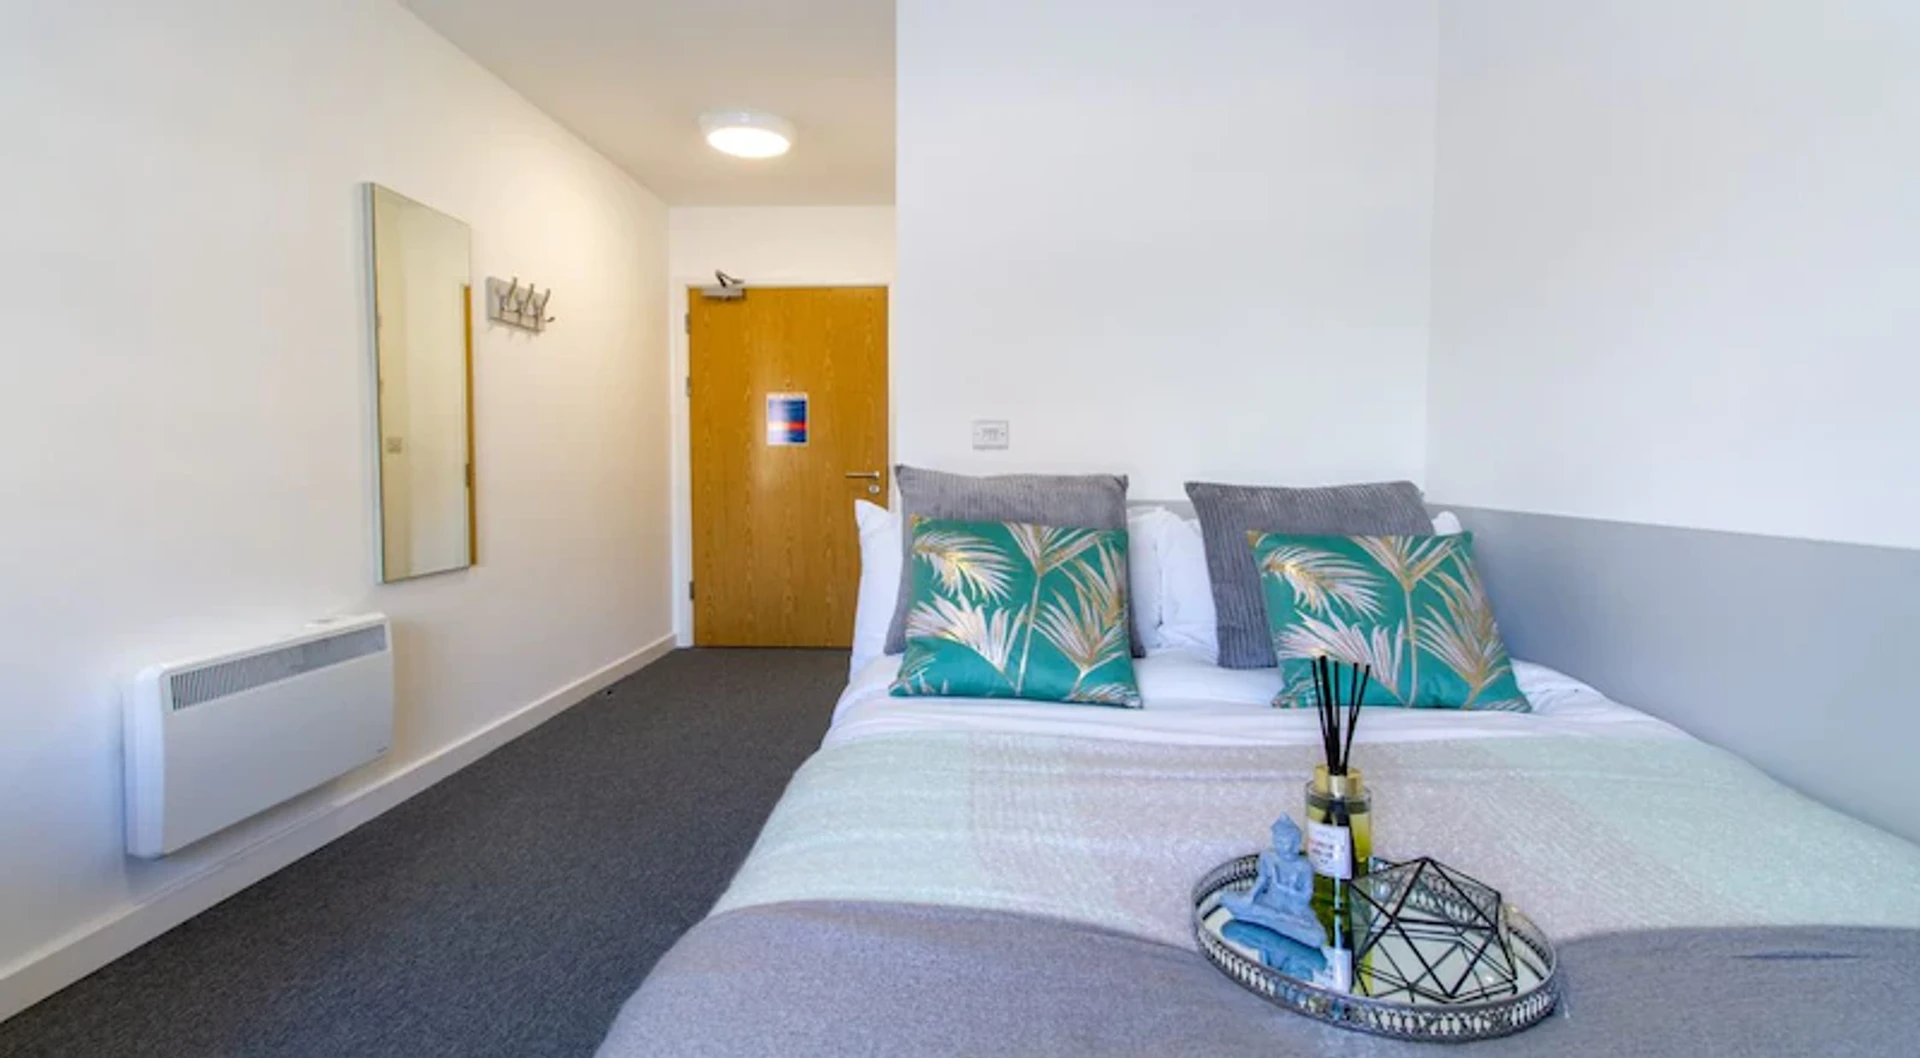 Renting rooms by the month in Derby